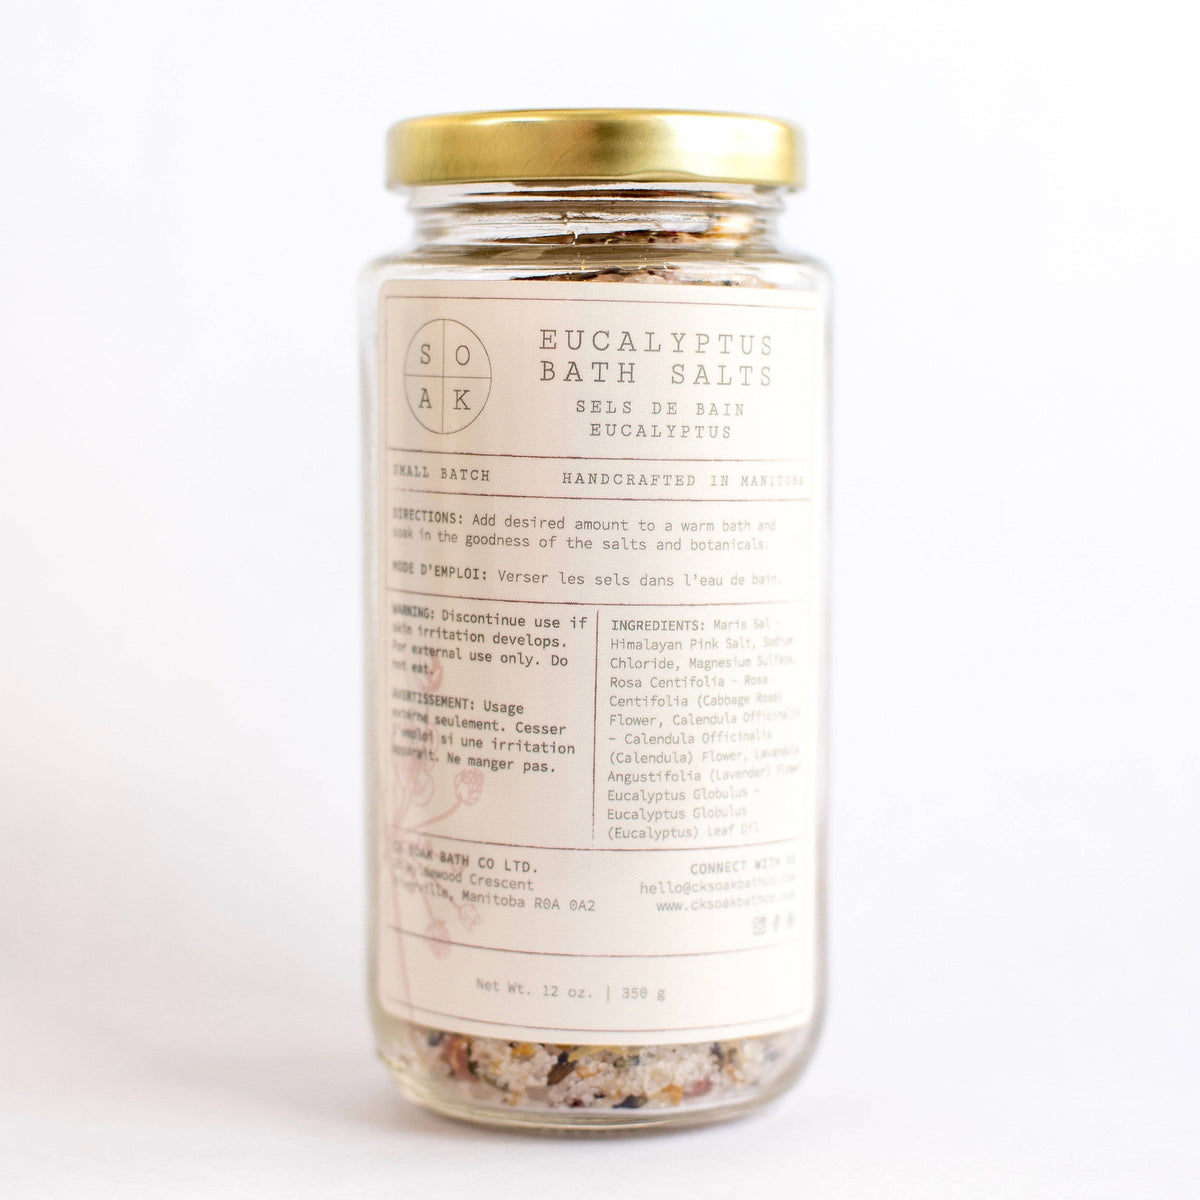 A clear glass jar filled with SOAK Bath Co.'s Eucalyptus Bath Salt blend labeled "eucalyptus bath salts", featuring ingredient details and branding. The background is bright and clean.